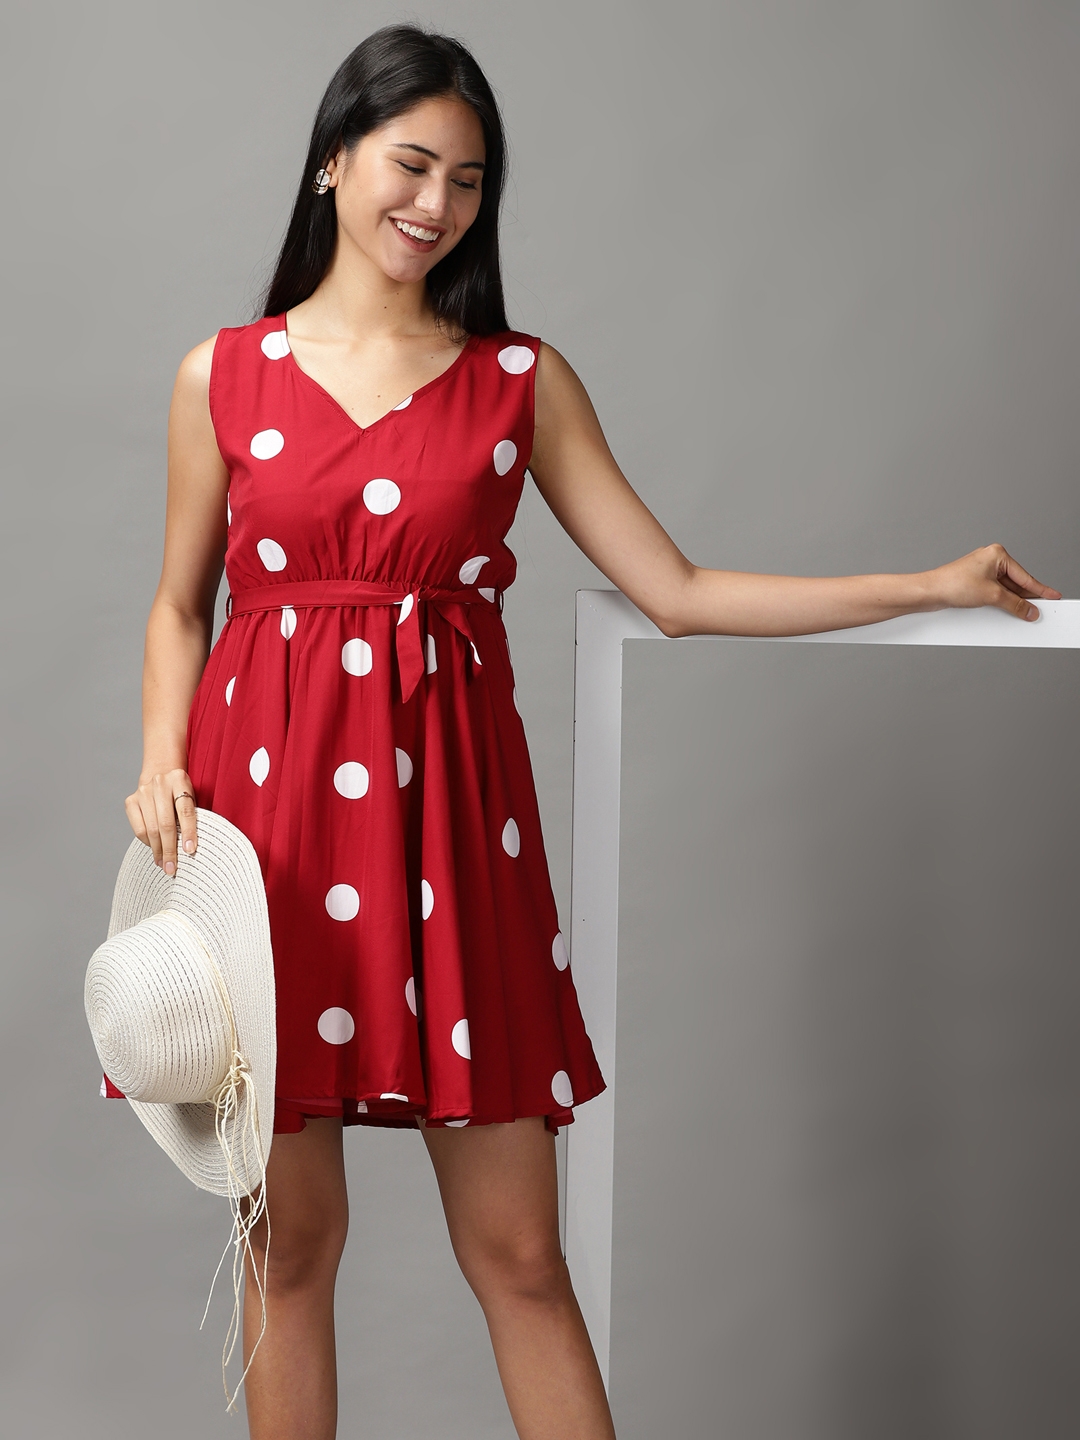 Women's Red Polyester Polka Dots Dresses